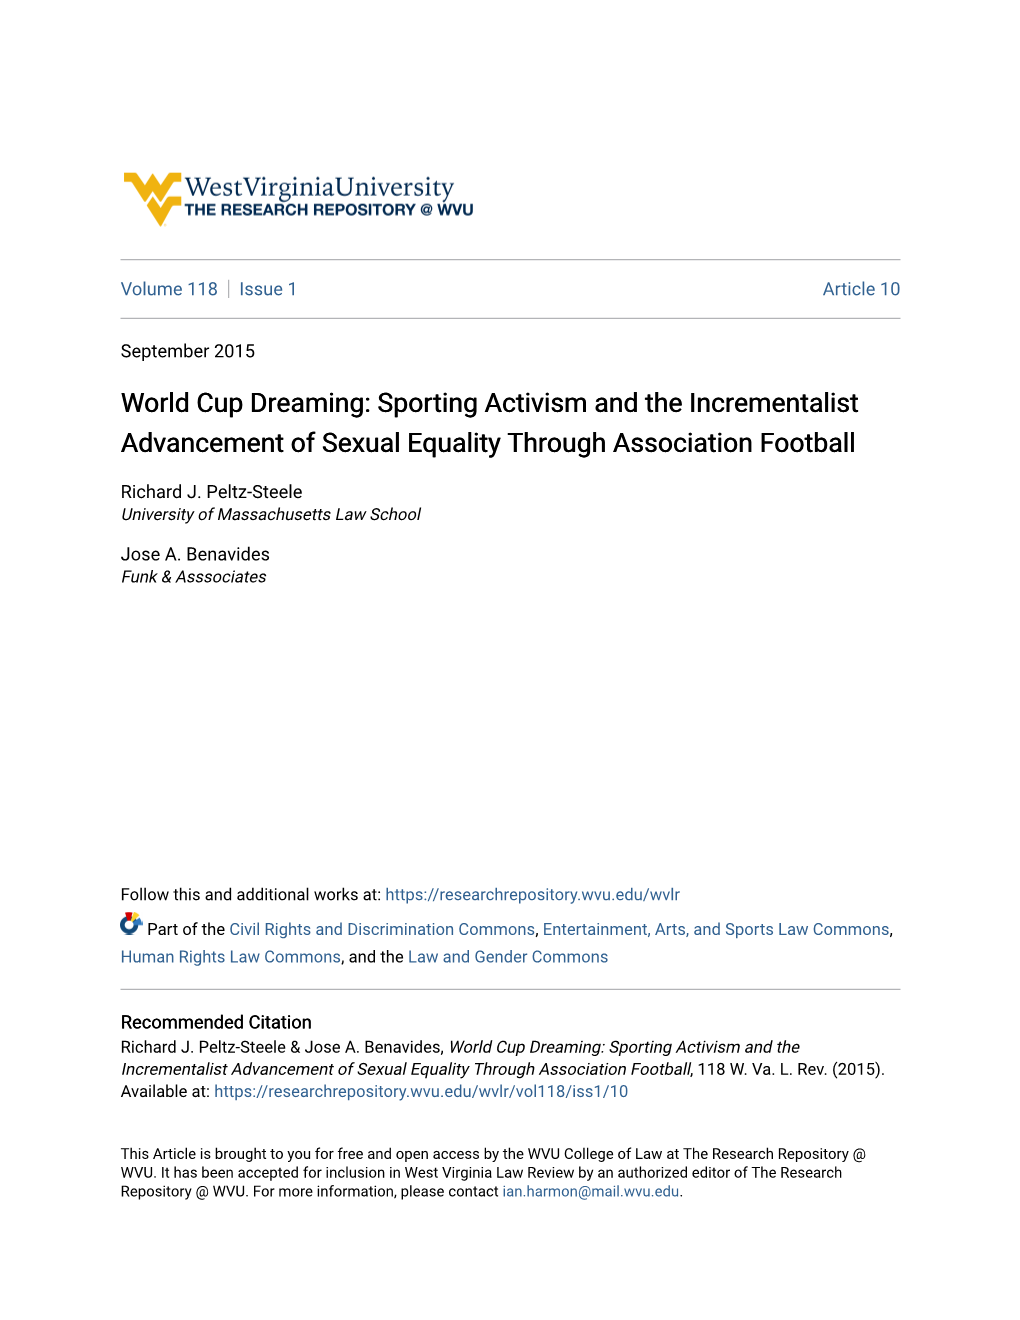 World Cup Dreaming: Sporting Activism and the Incrementalist Advancement of Sexual Equality Through Association Football